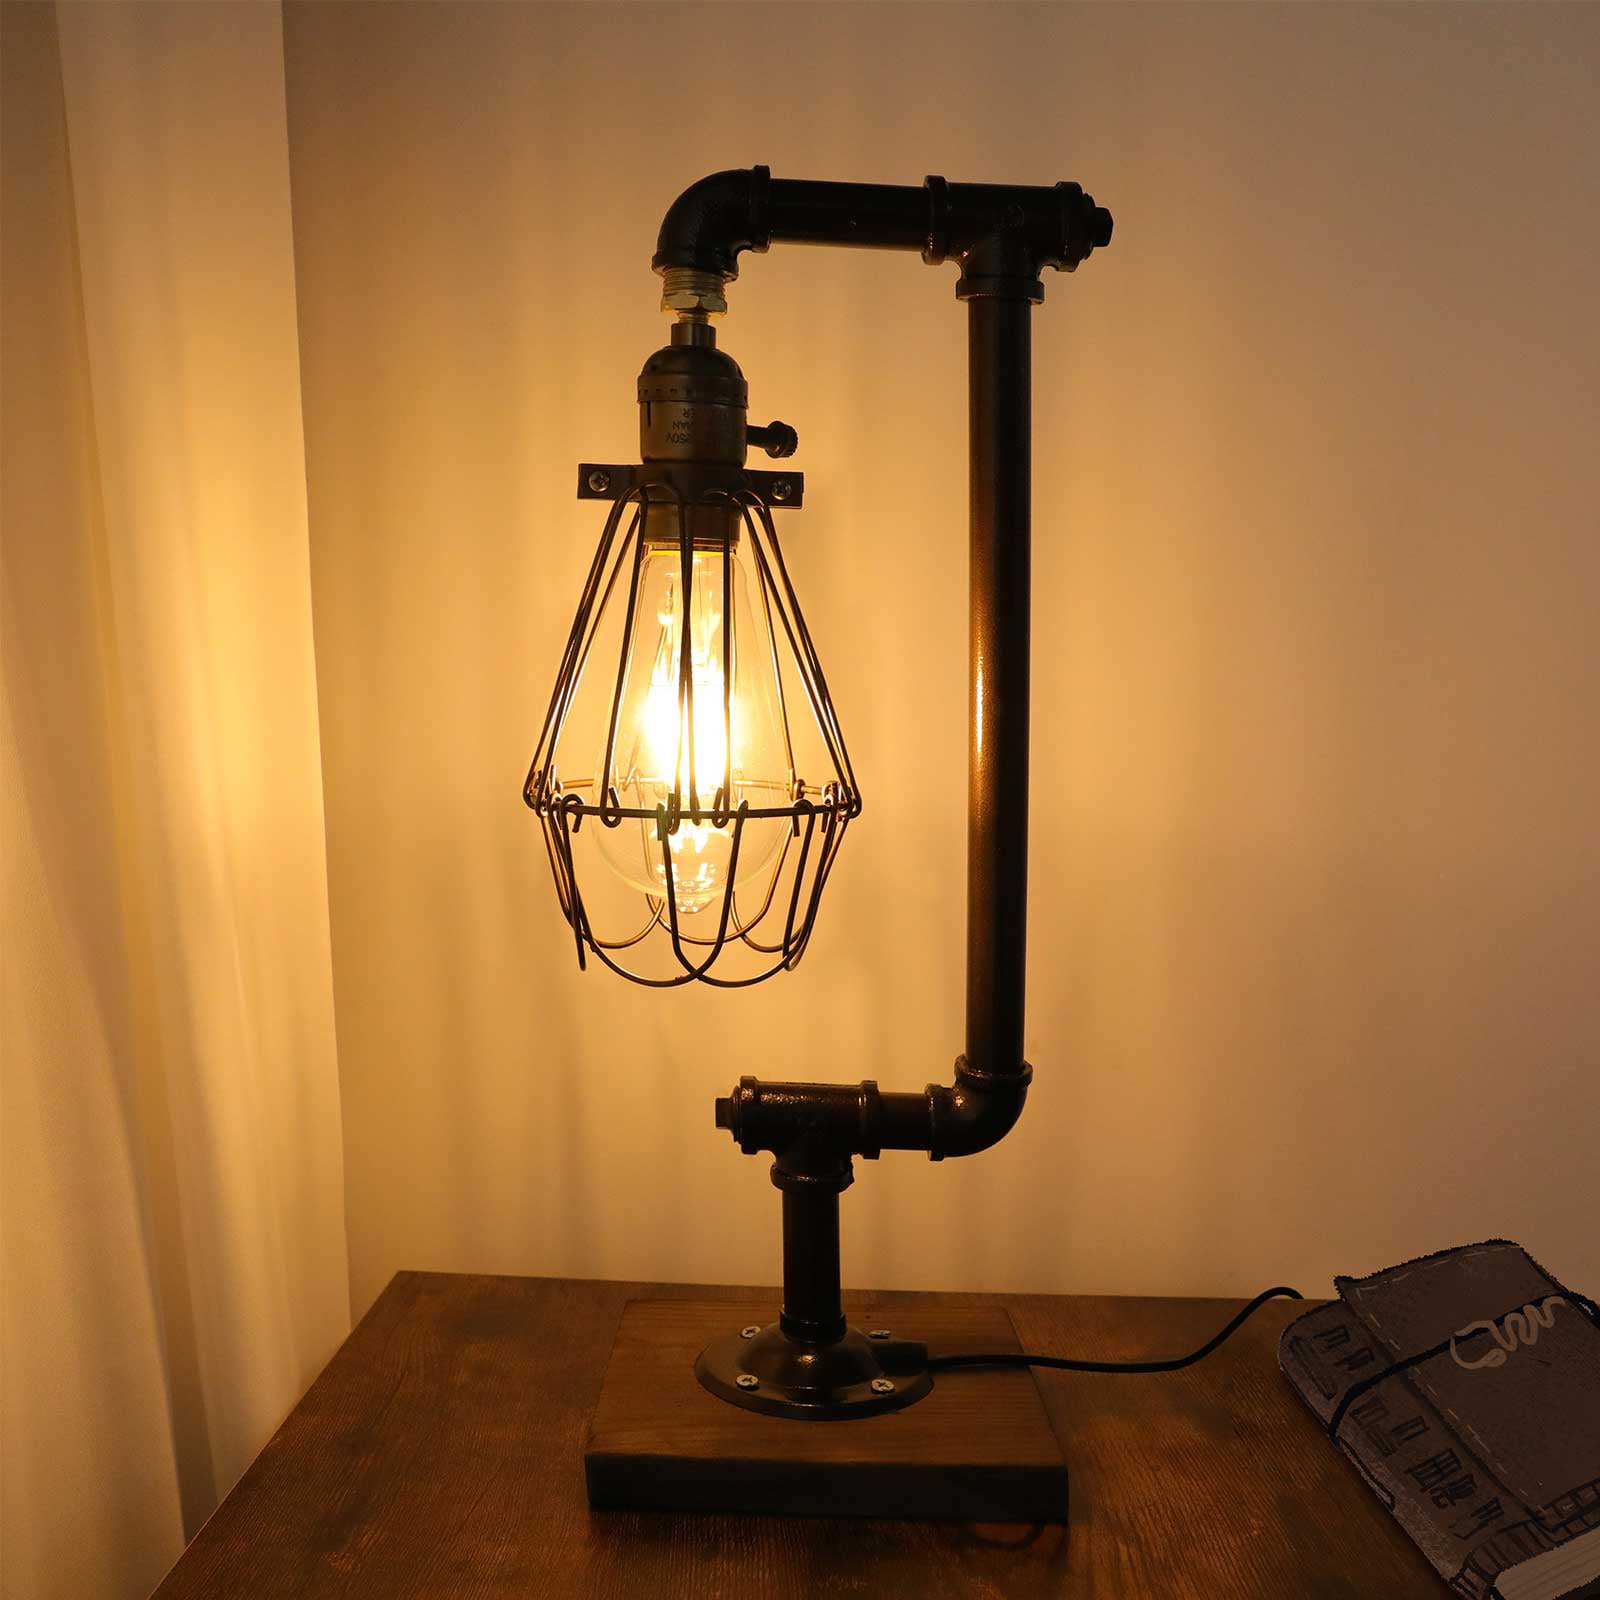 Aged Rustic Metal Y-Nut Loft Style Lamp Water Pipe Table Desk Light with Dimmer Yellow Steampunk Industrial Vintage Style 